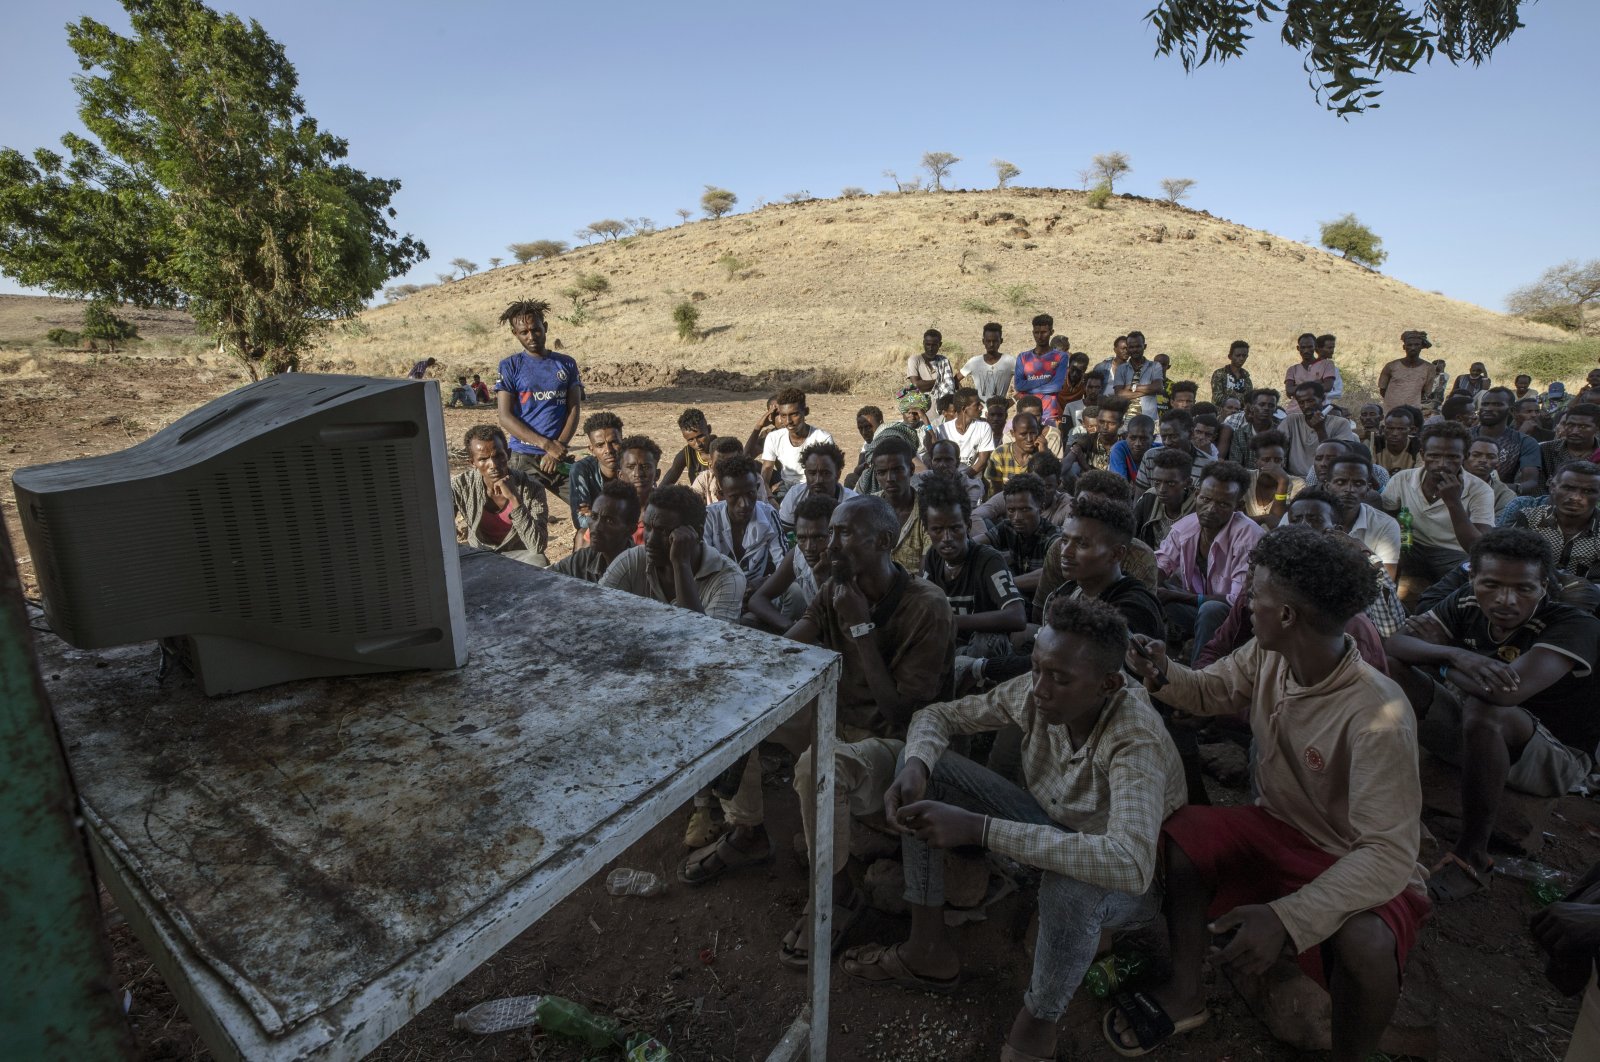 Men who fled the conflict in Ethiopia's Tigray region watch the news on television, at Umm Rakouba refugee camp in Qadarif, eastern Sudan, Dec. 5, 2020. (AP Photo)